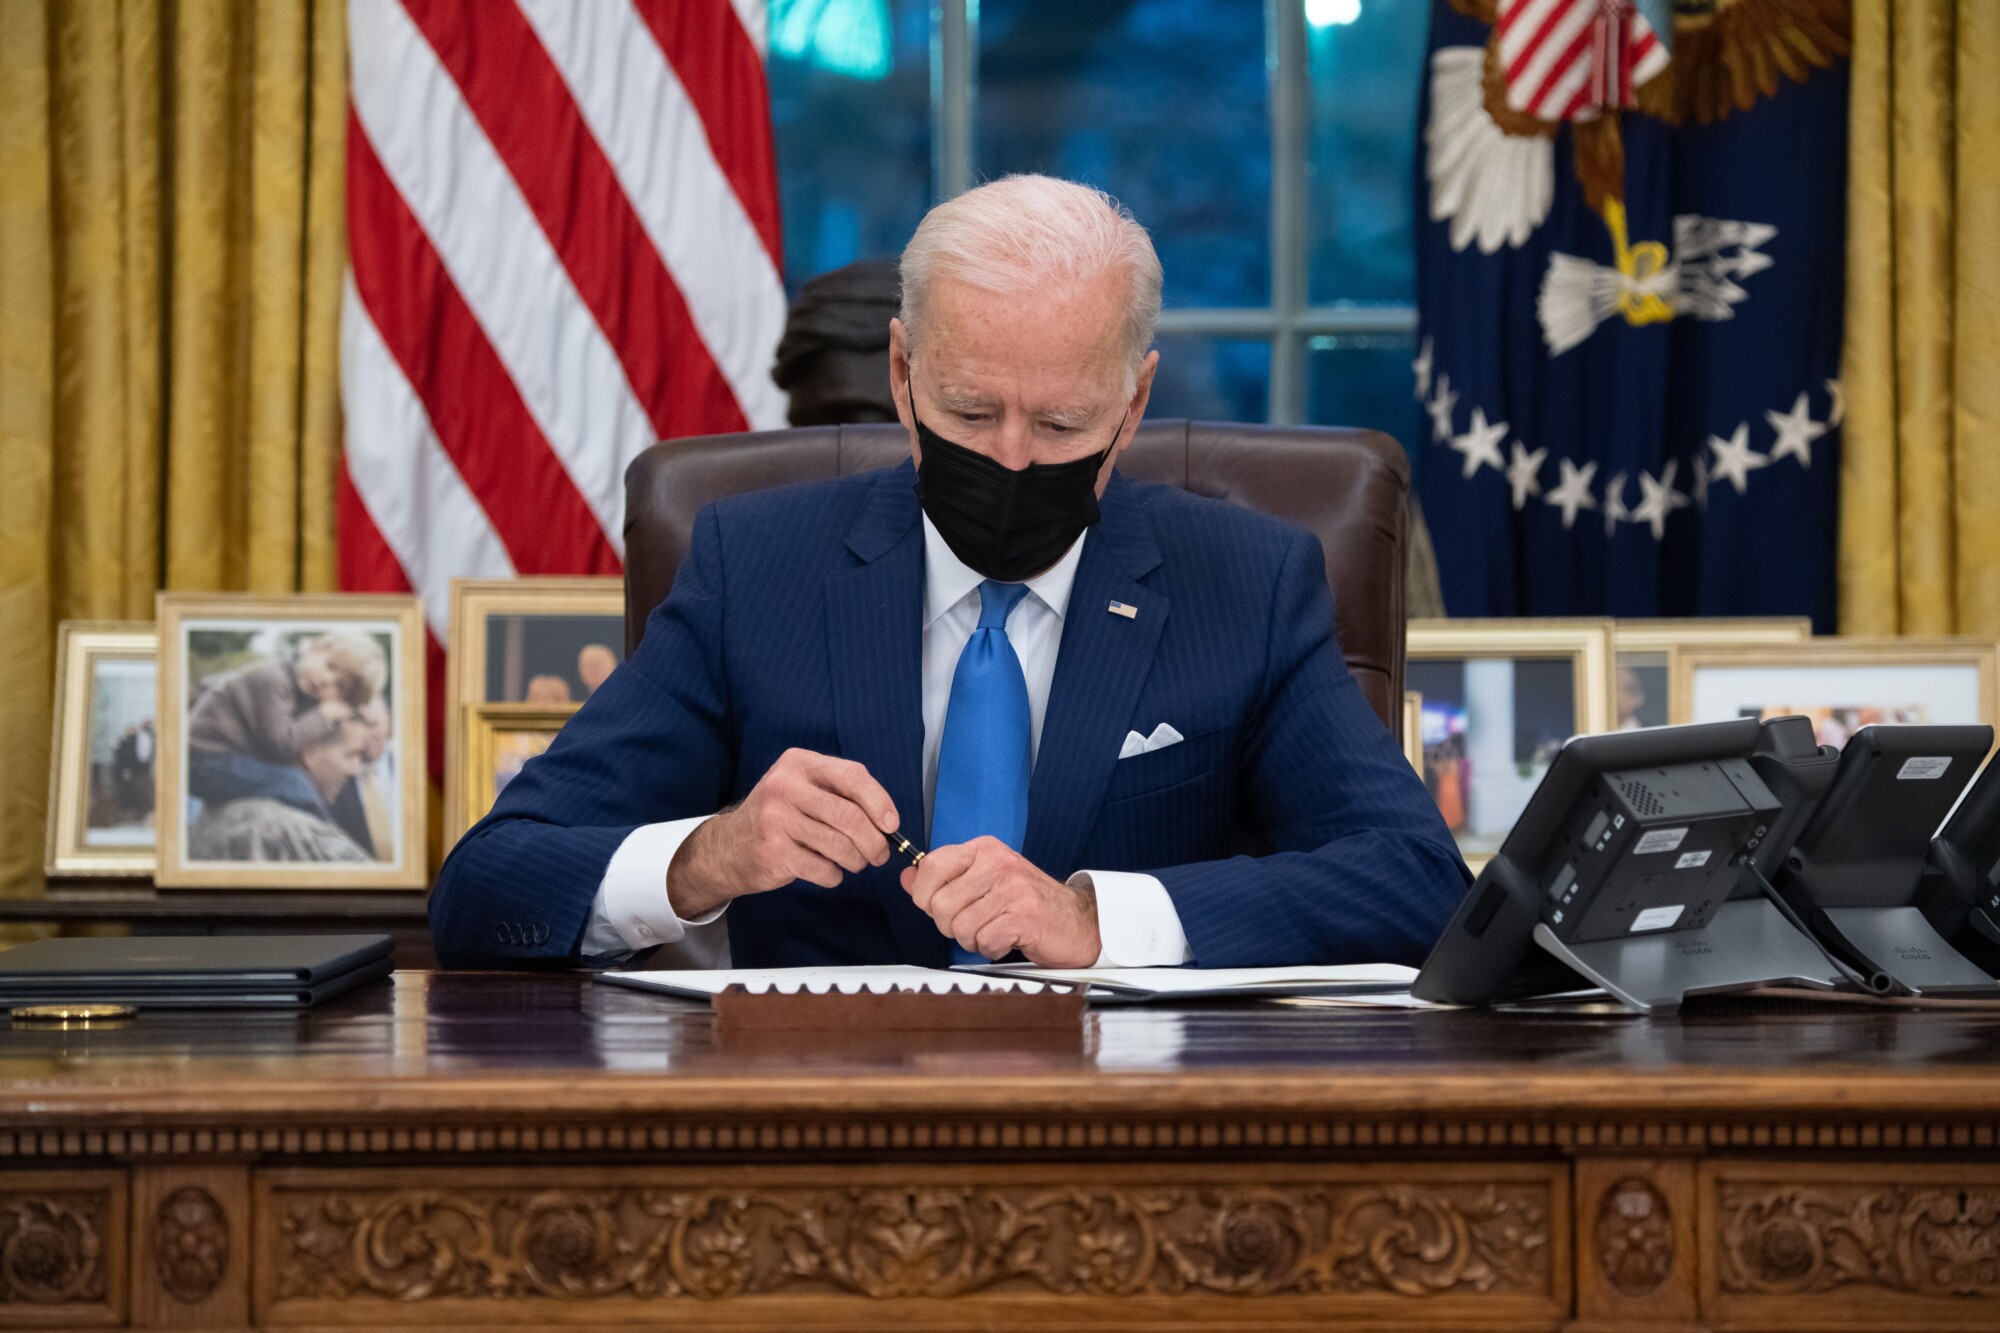 Biden Signs Orders on Immigration, Asylum, Family Separation